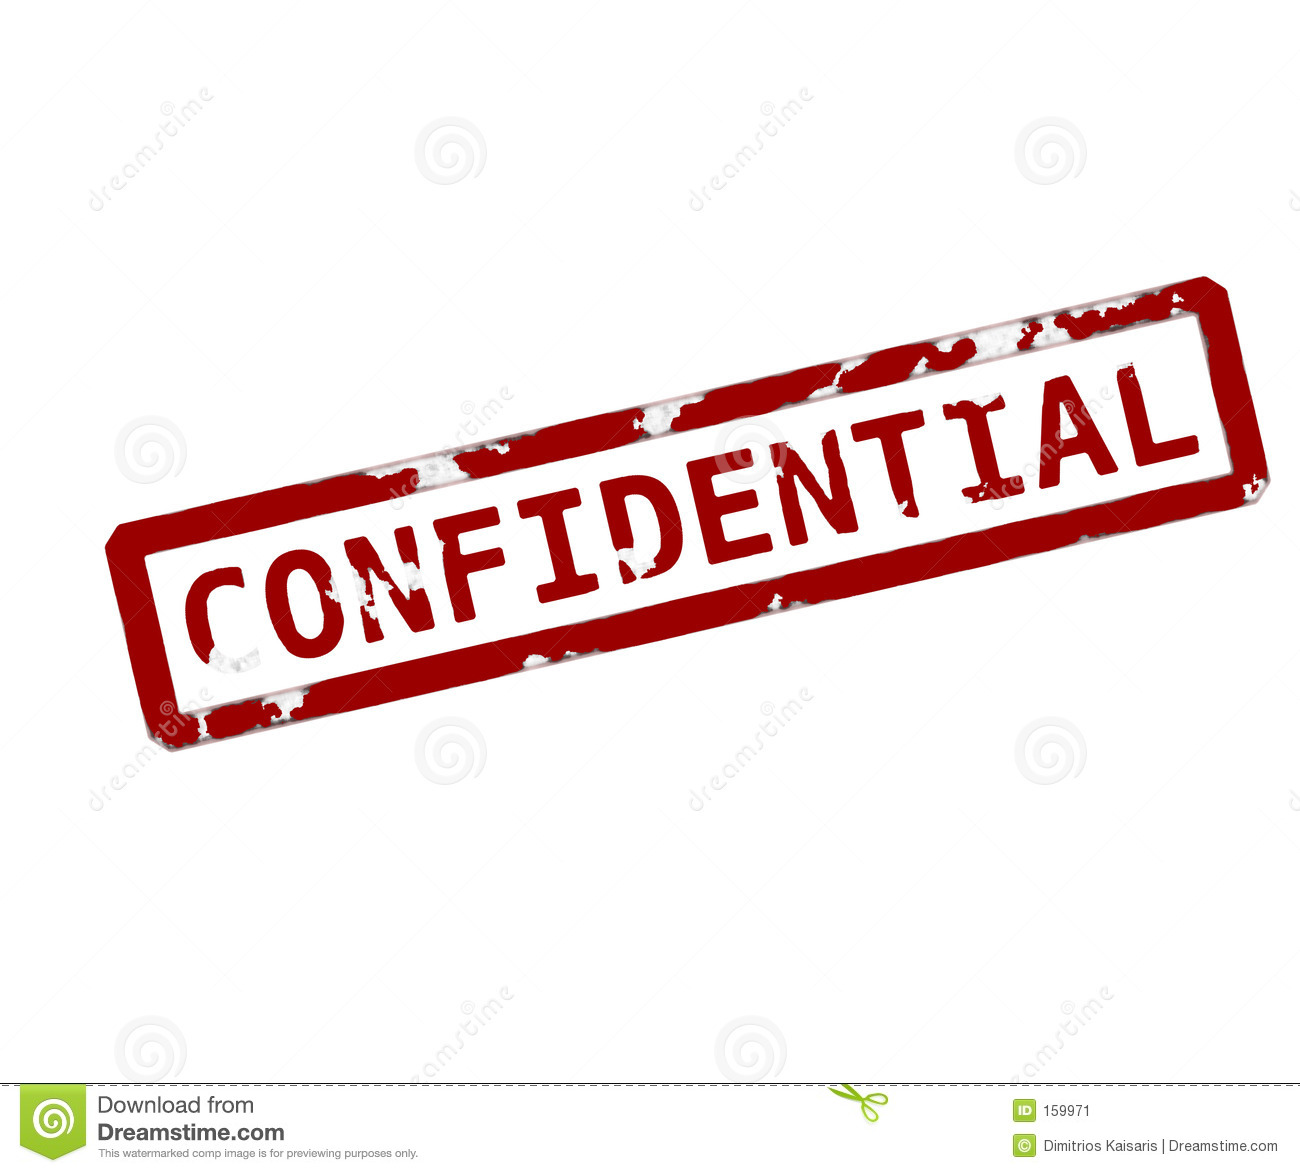 Confidential Rubber Ink Stamp Stock Image   Image  159971